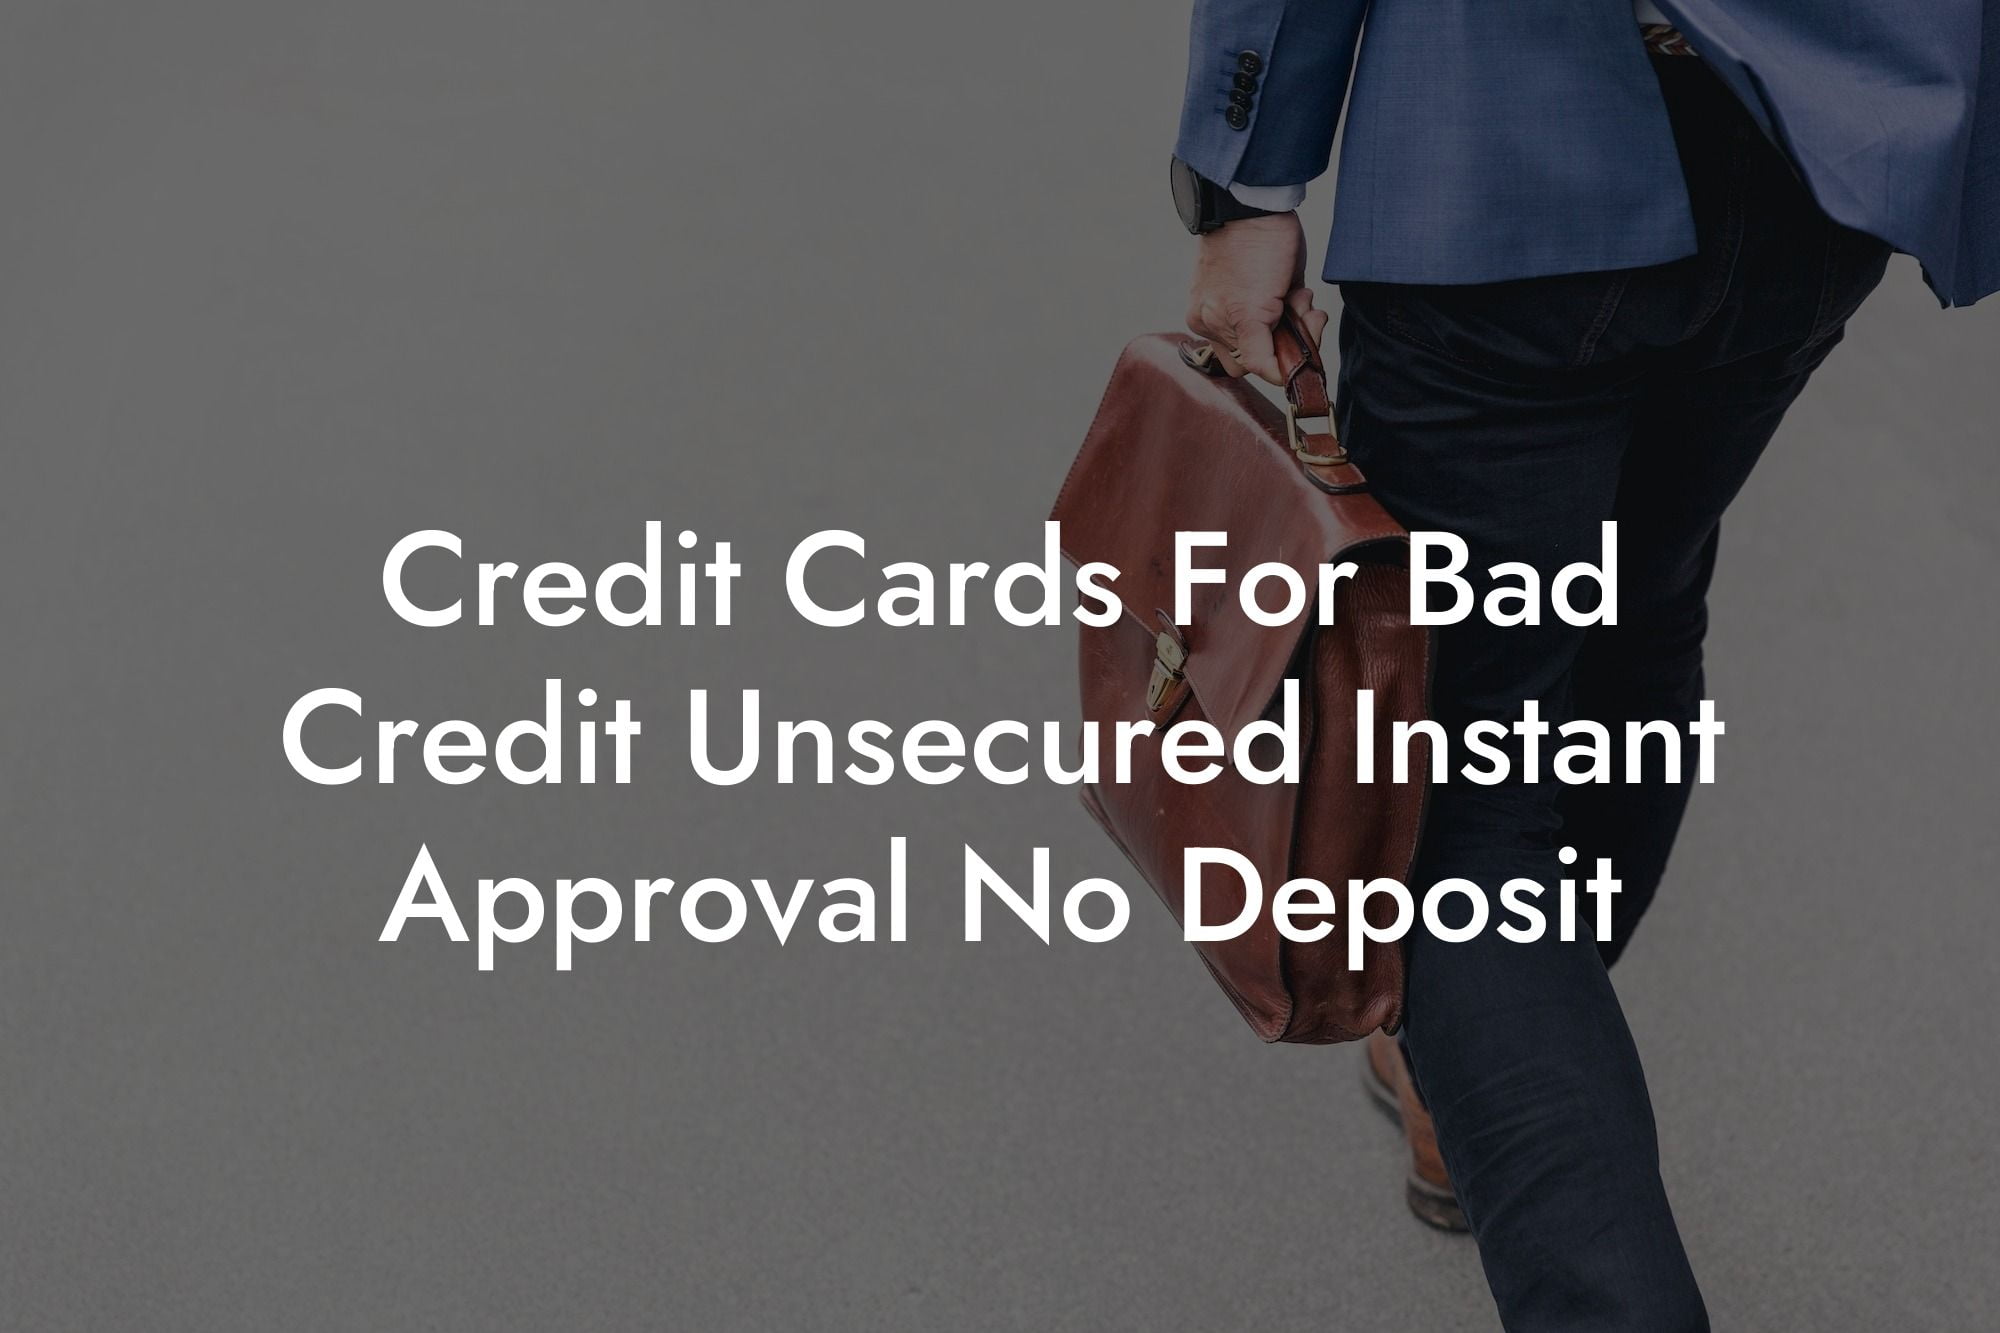 Credit Cards For Bad Credit Unsecured Instant Approval No Deposit